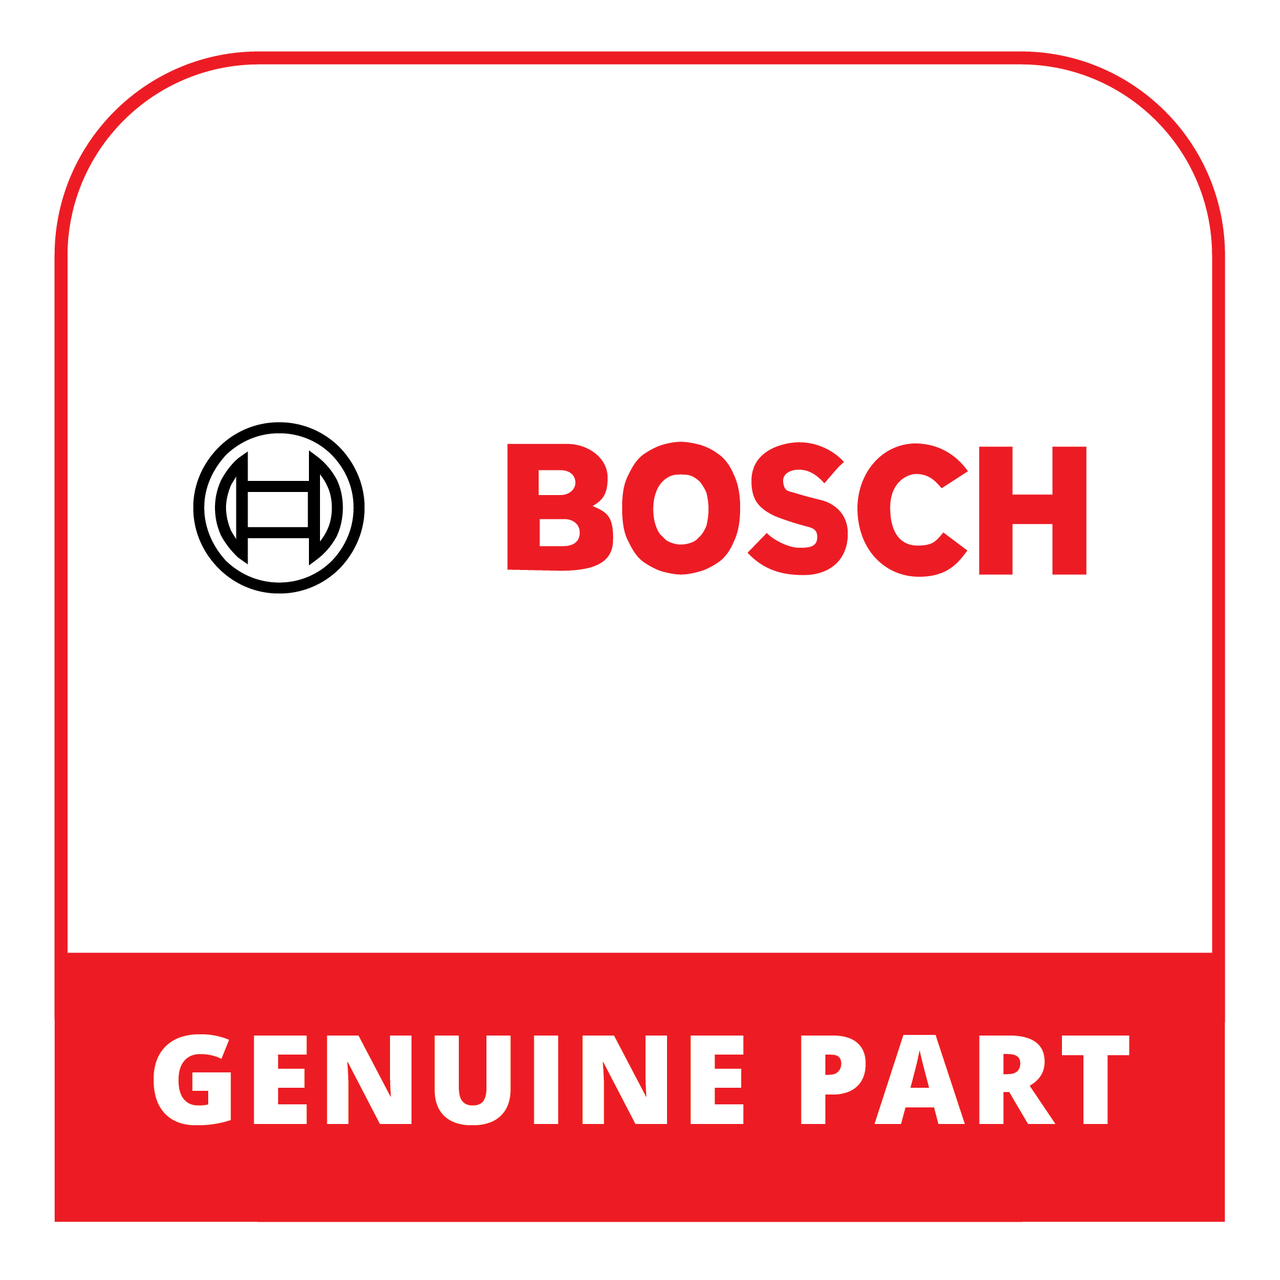 Bosch (Thermador) 10014207 - Transformer-Ignition - Genuine Bosch (Thermador) Part